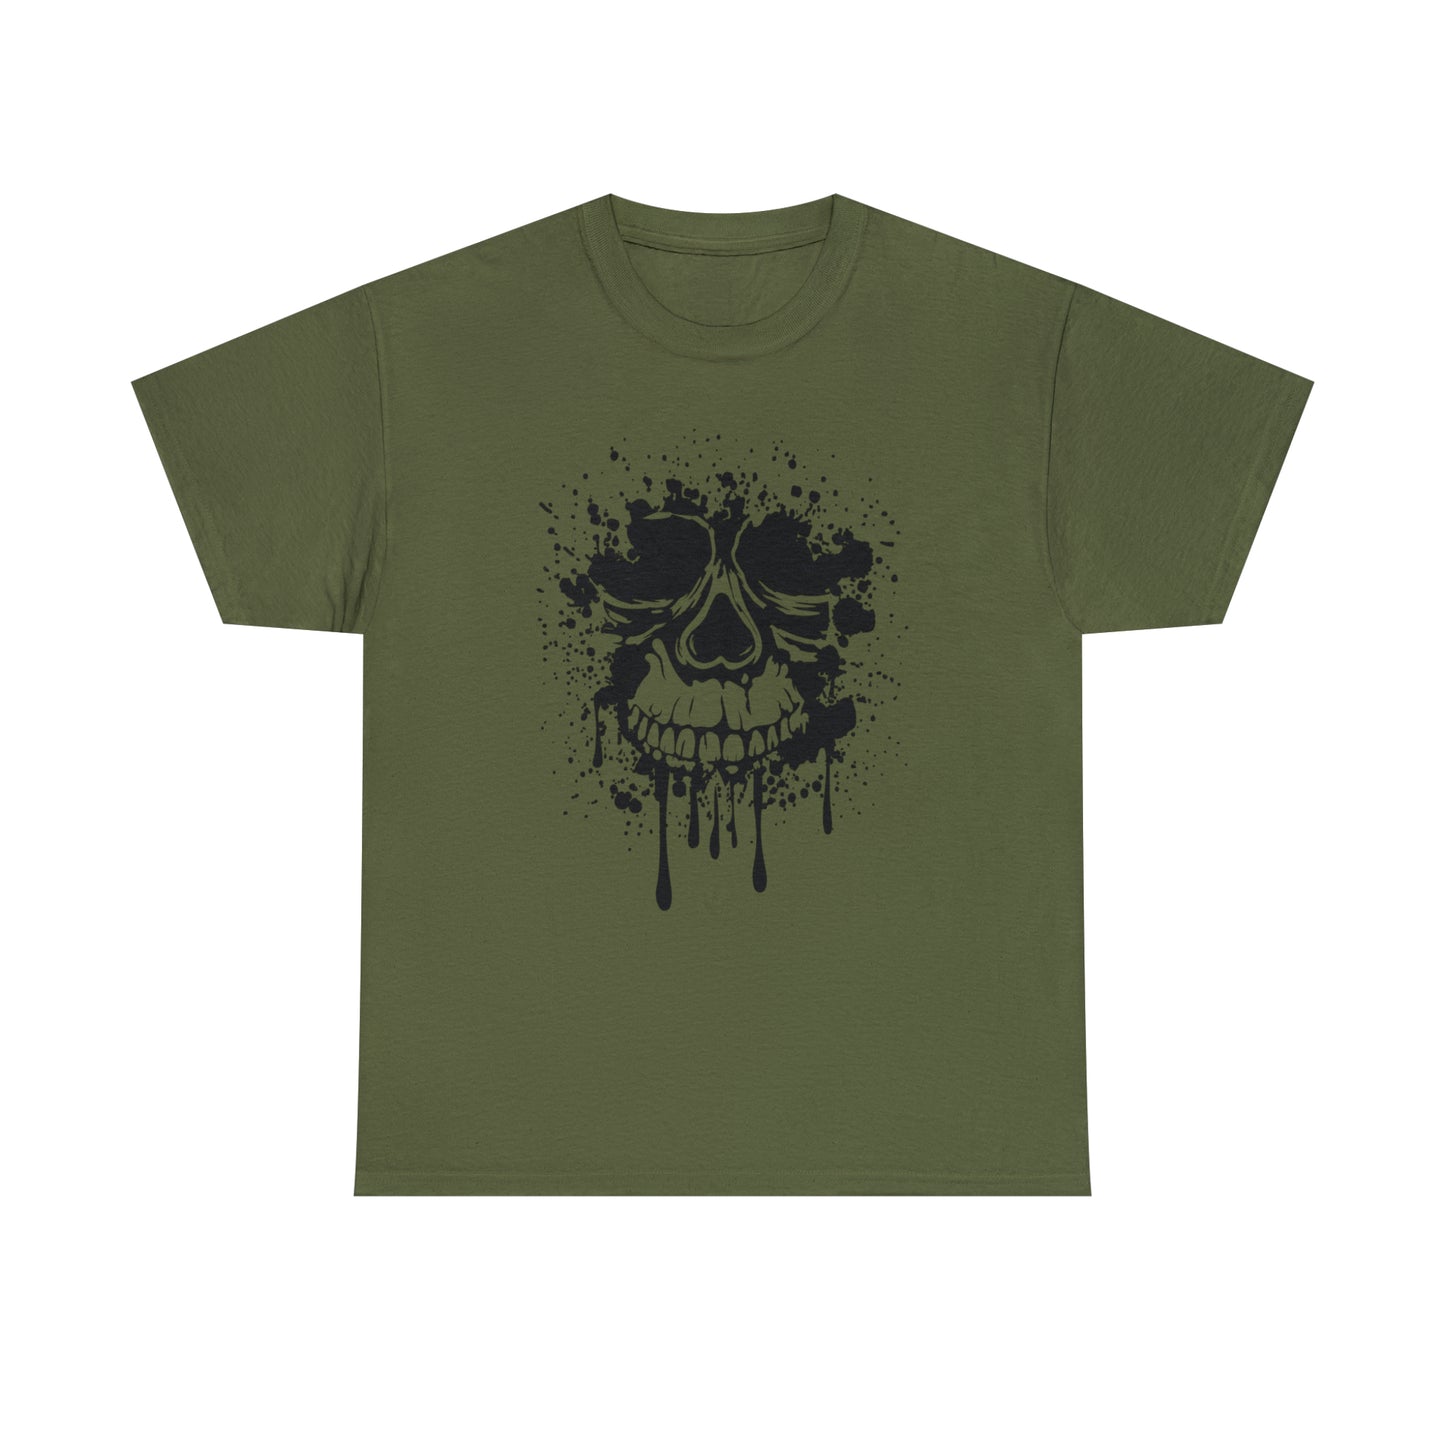 Skull Tattoo T-Shirt For Scary Costume T Shirt For Halloween TShirt For Graphic Tee